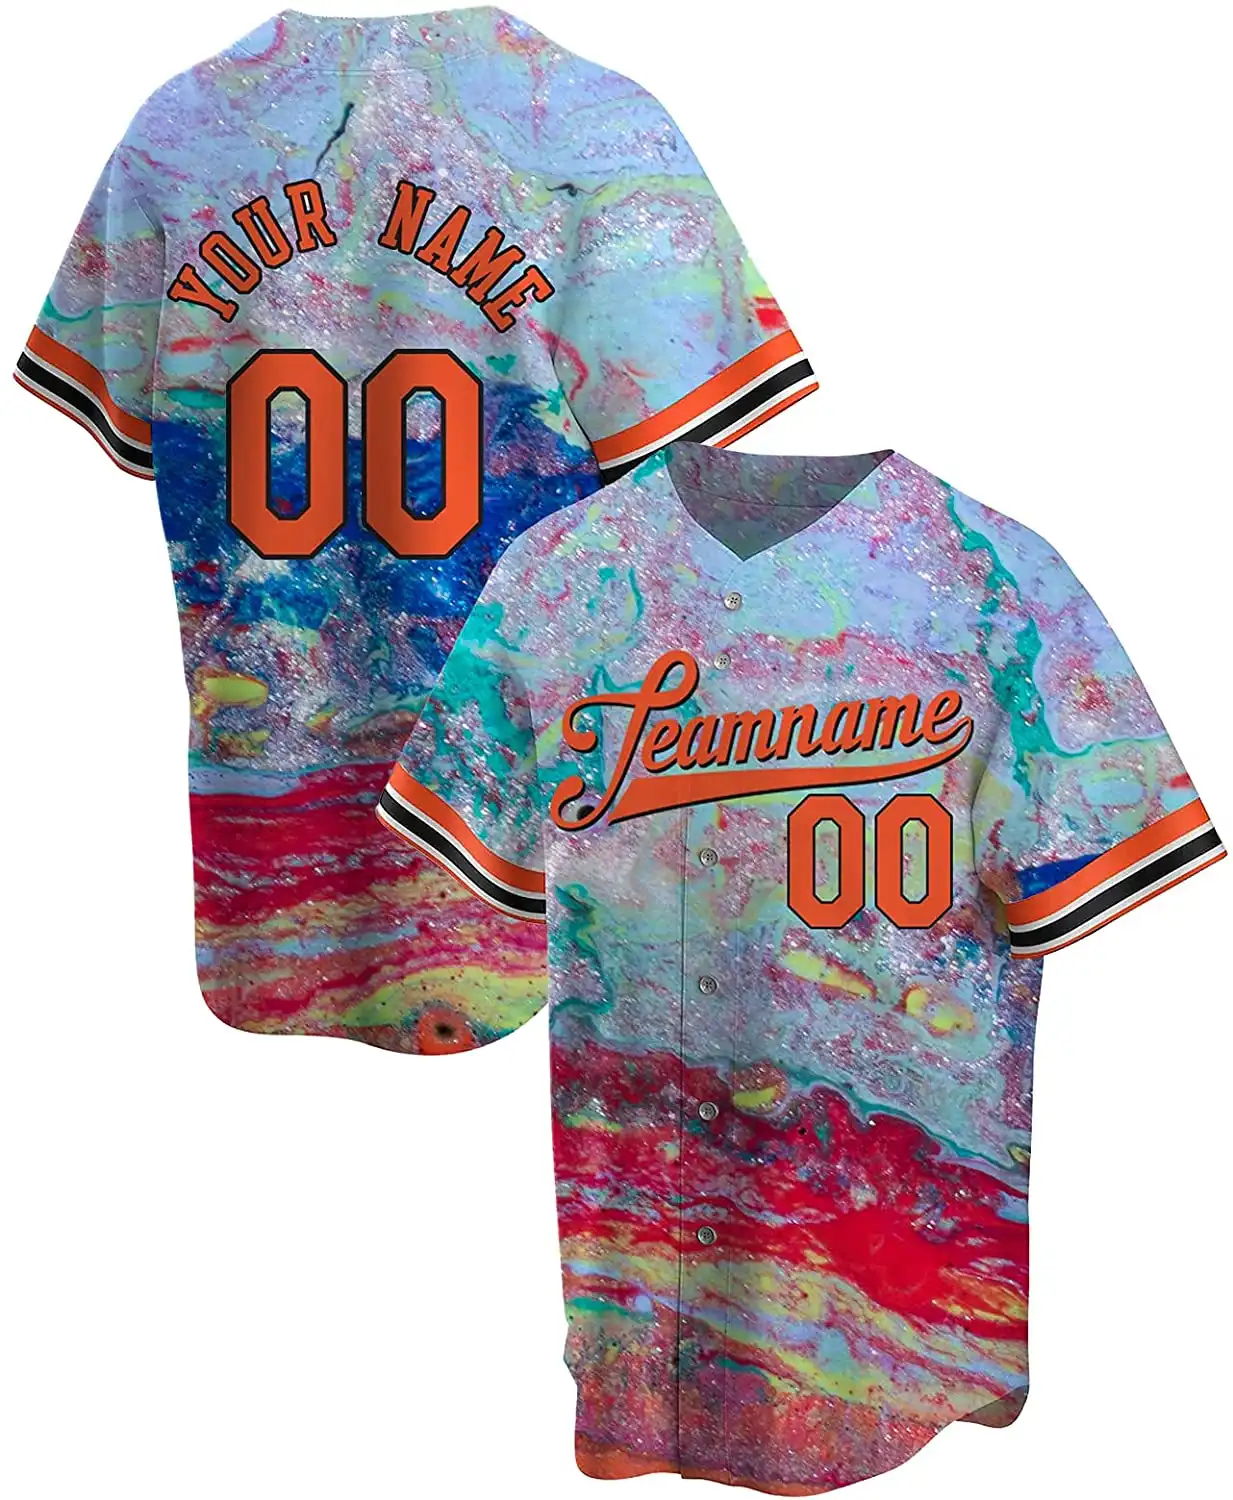 Personalized Splatter Art Printed Name And Number Idea Gift For Fans Baseball Jersey